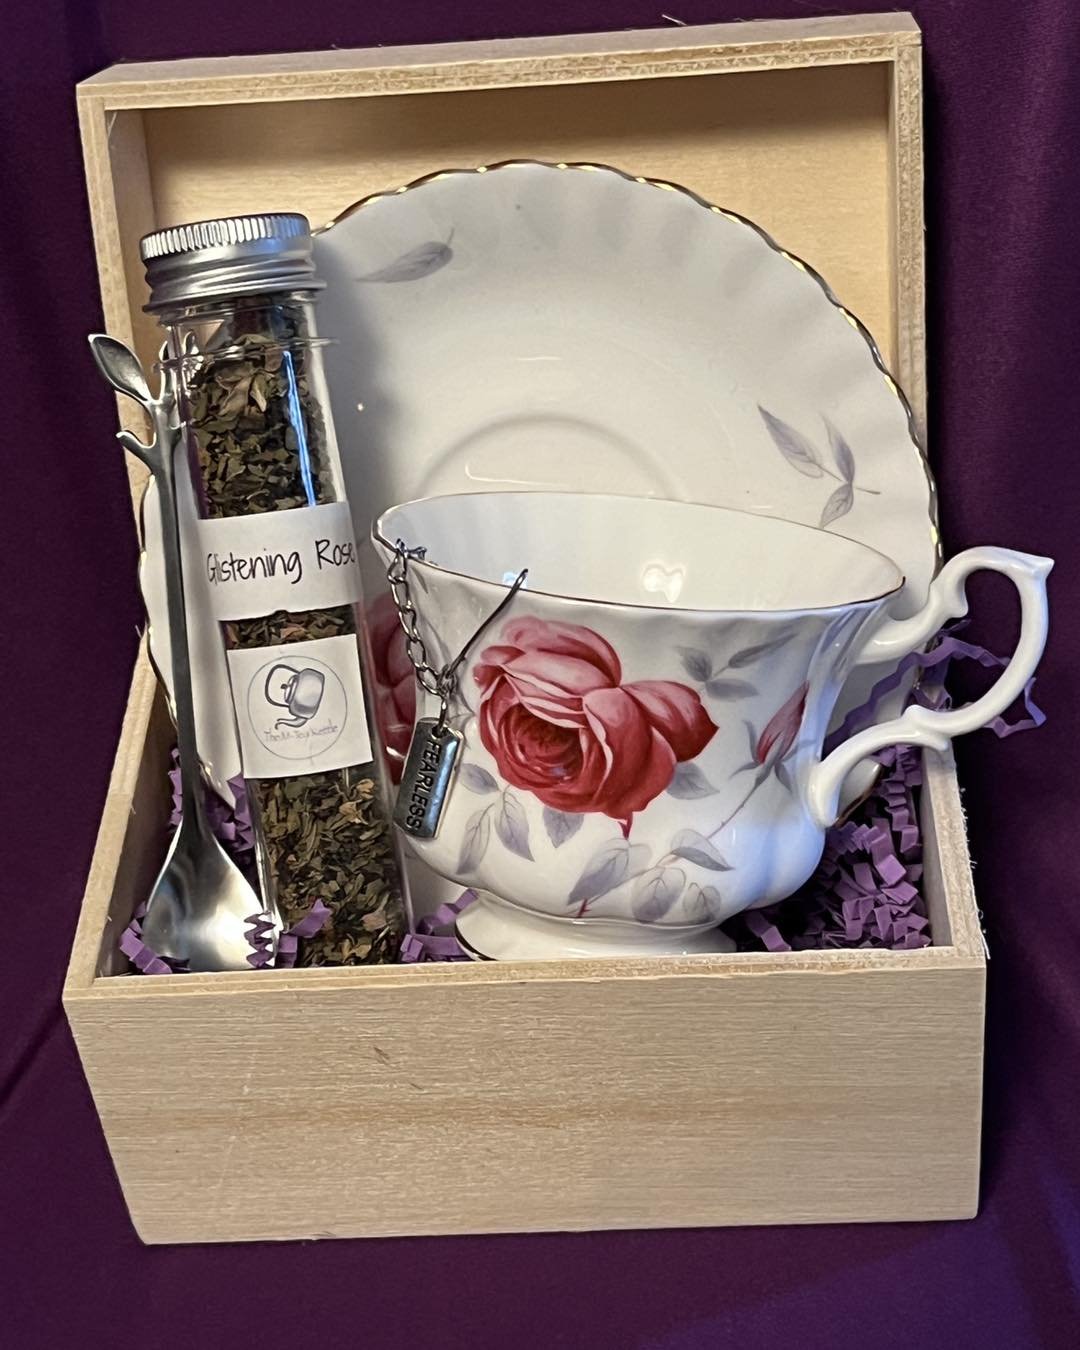 Can you tell we&rsquo;re excited??? ANOTHER gift set to show off that is going to be available this weekend! 
.
.
#tea #teatime #witchyvibes #mteakettle #looseleafteashop #nerdytea #looseleafteas #artisantea #dndtea #witchythings #pixelsapothecary #t